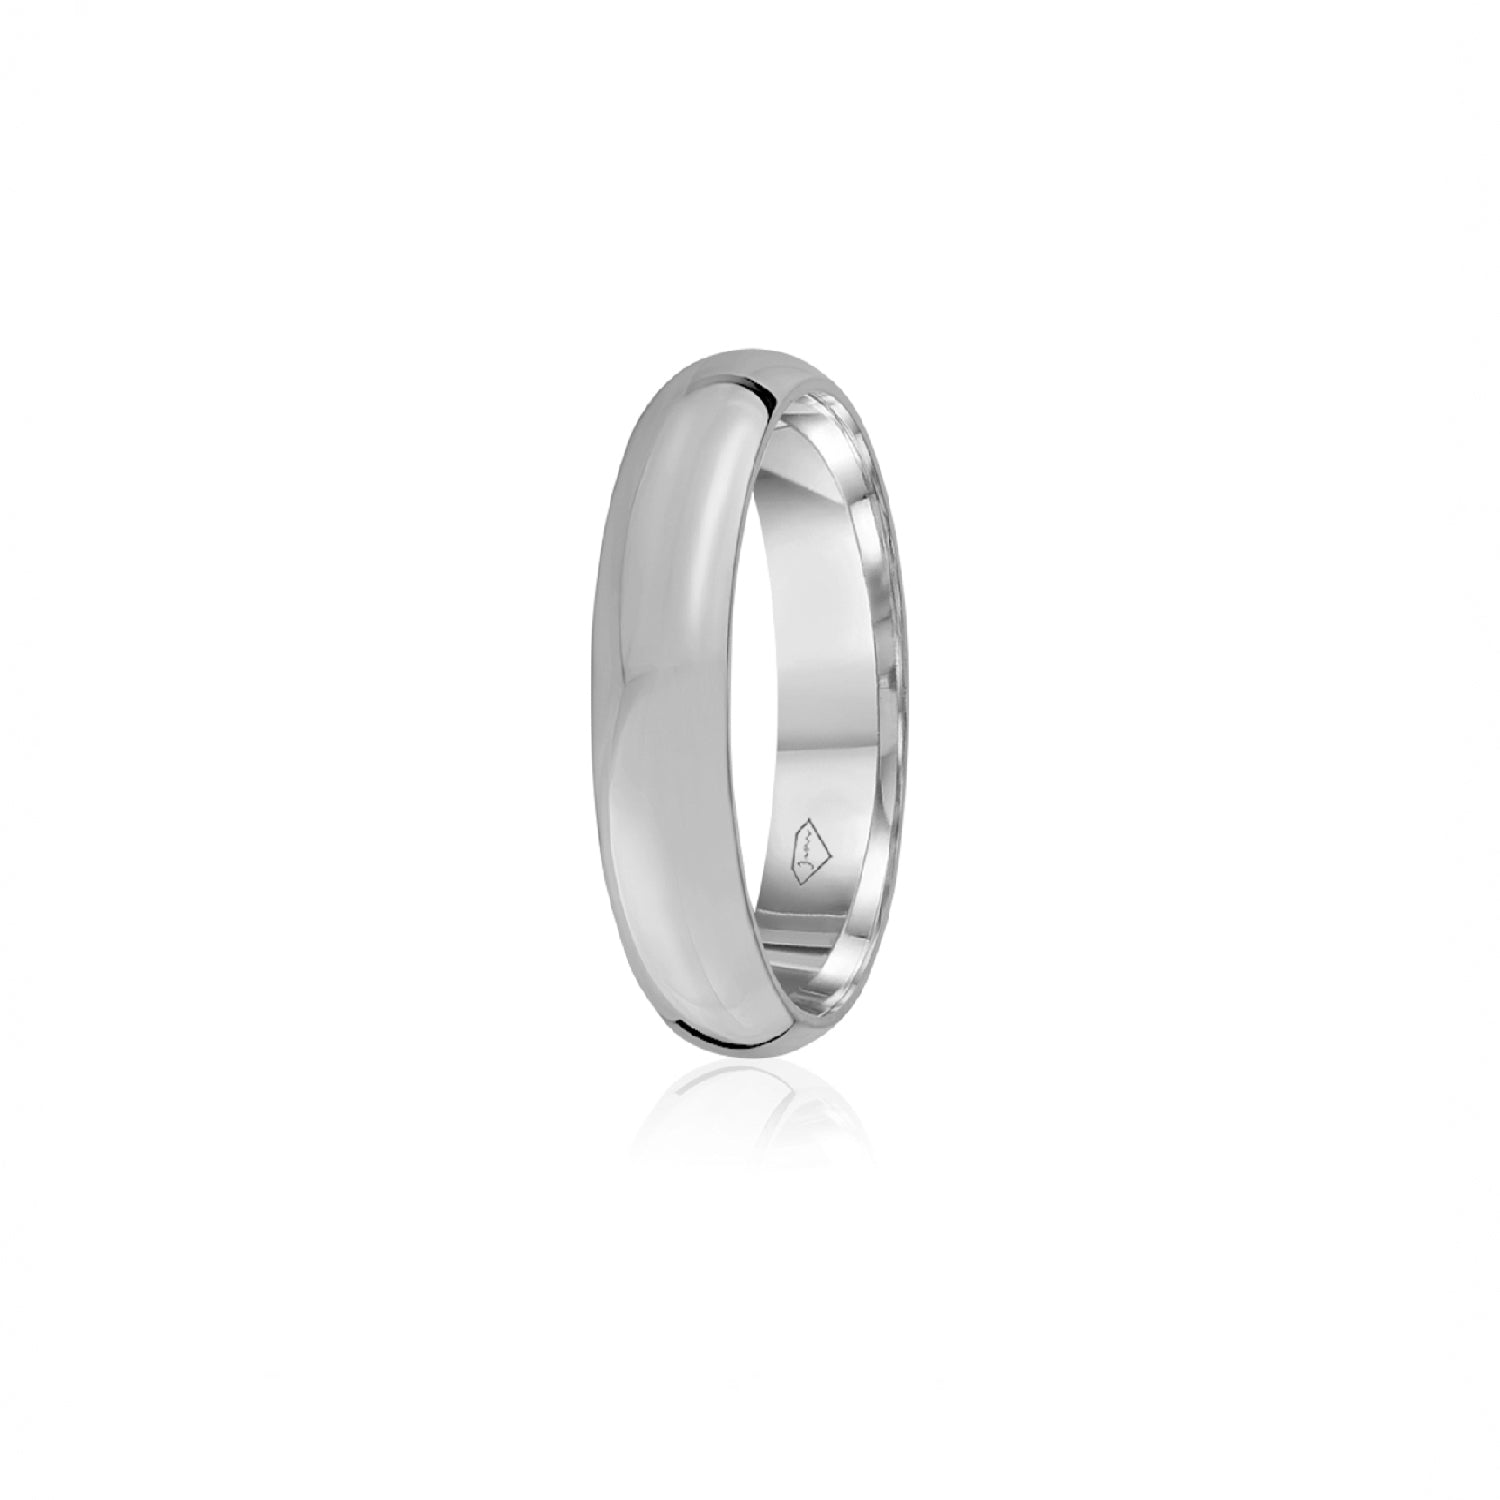 Classic Polished Finish Standard Fit 6-7 mm Wedding Band in Platinum